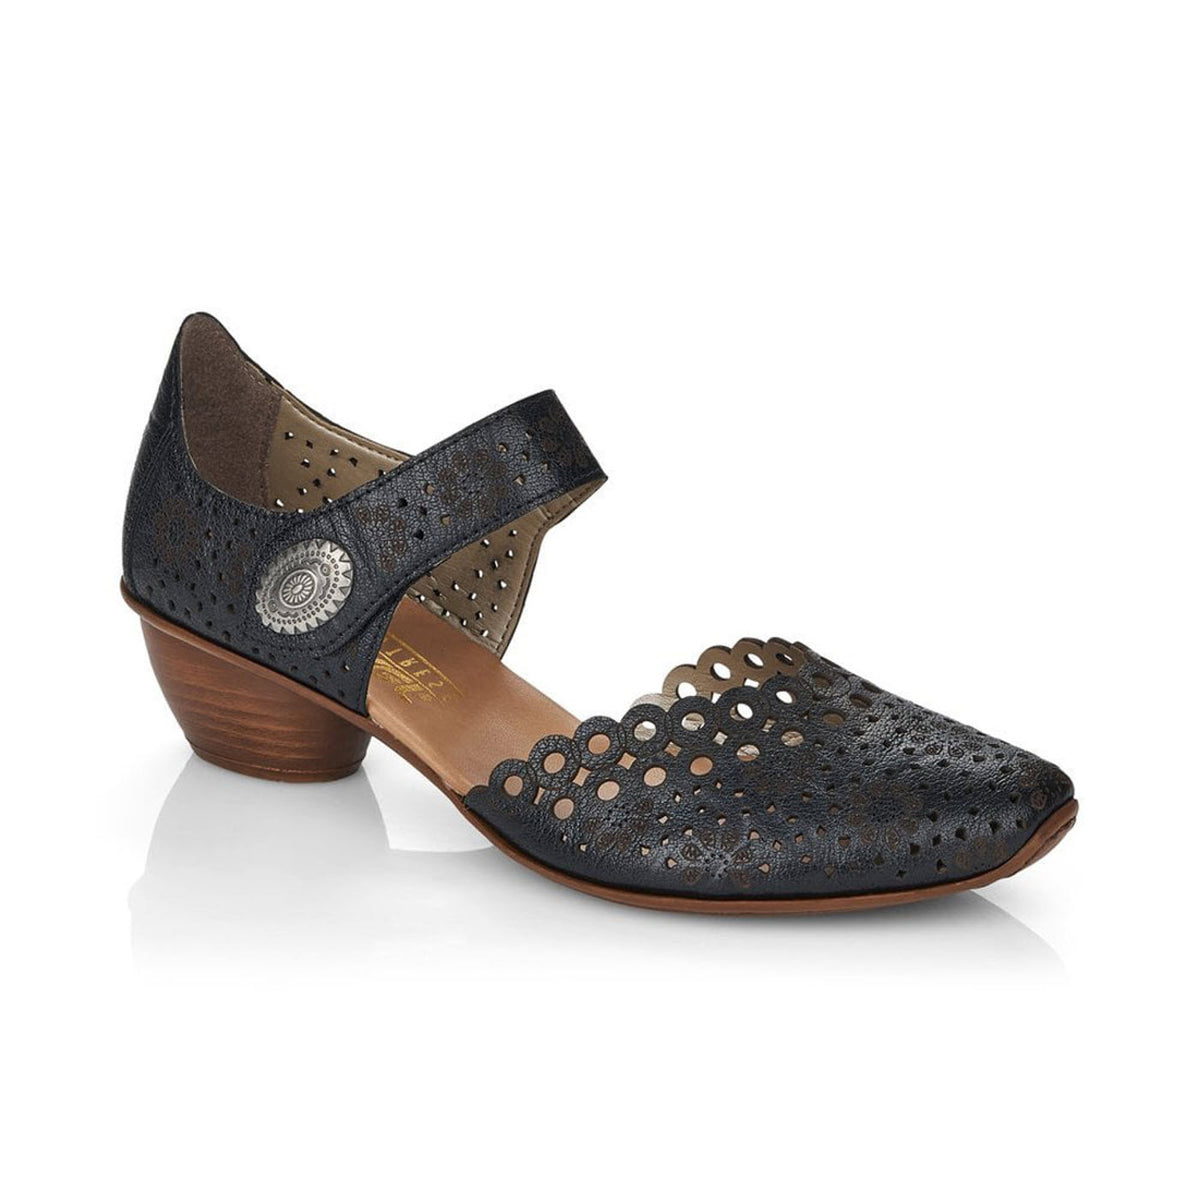 A navy blue Rieker women&#39;s shoe with a low heel and laser-cut design, featuring a round embellishment and an adjustable ankle strap.